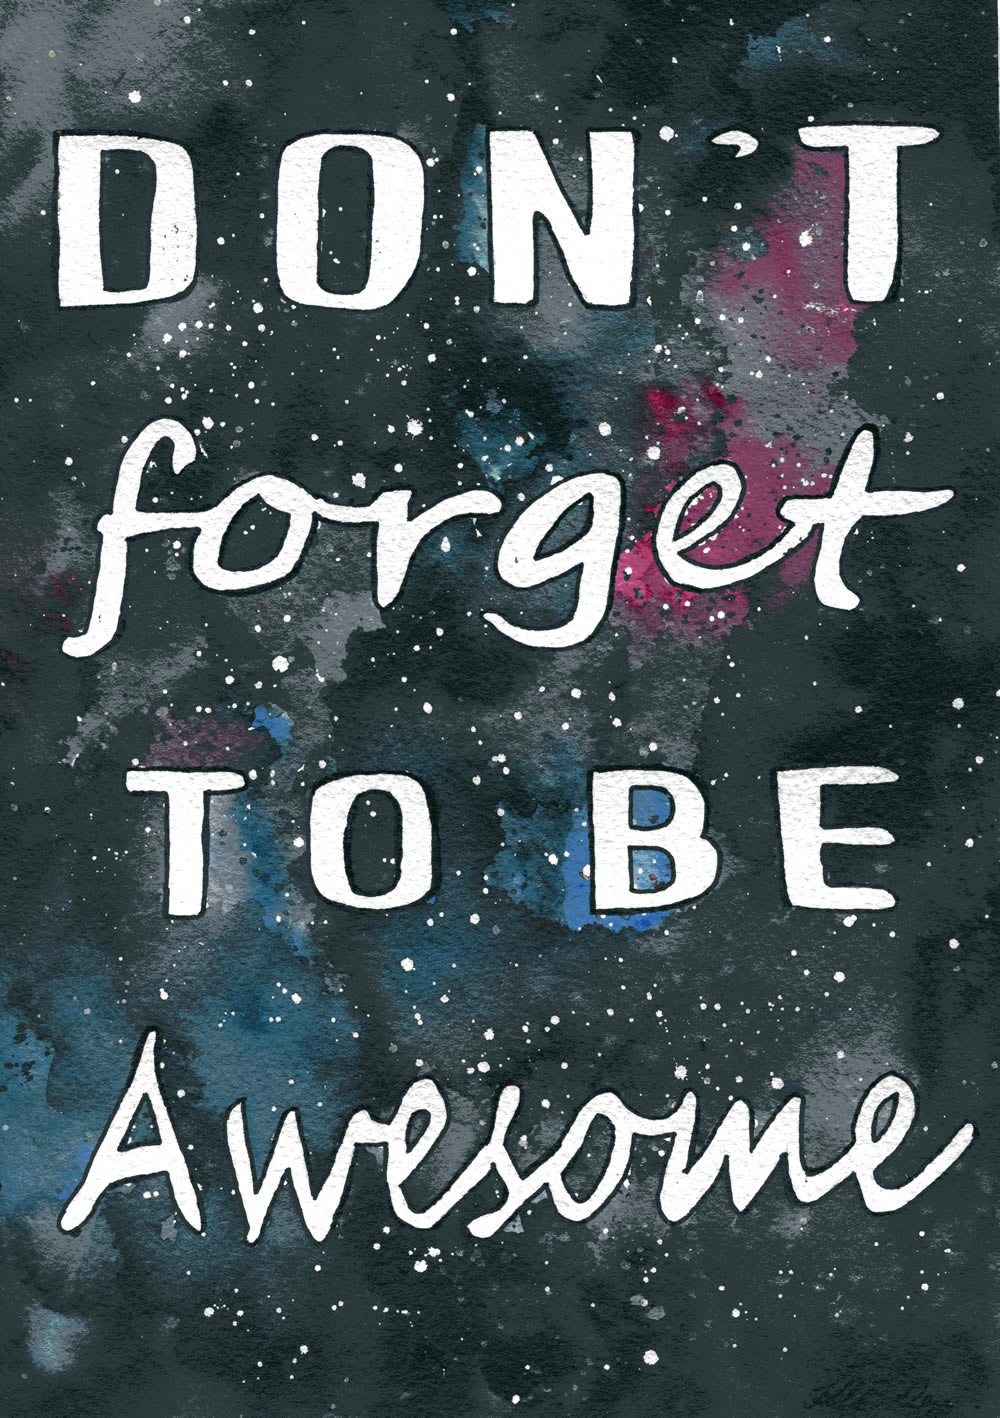 Don't forget to be awesome - space painting by KL Bailey Art